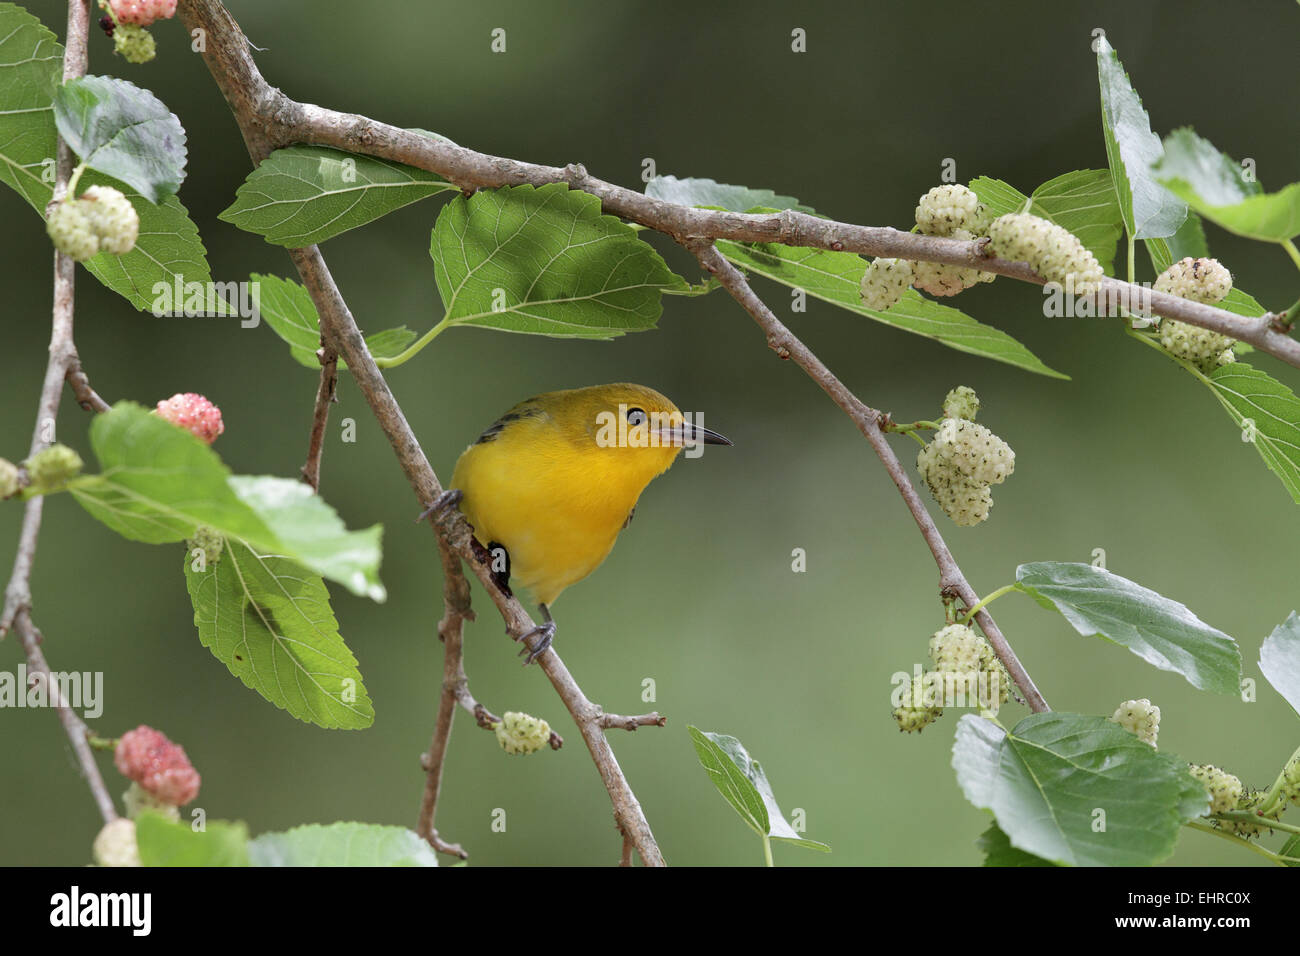 Prothonotary Warbler, Protonotaria citrea, female feeding in Mulberry tree Stock Photo